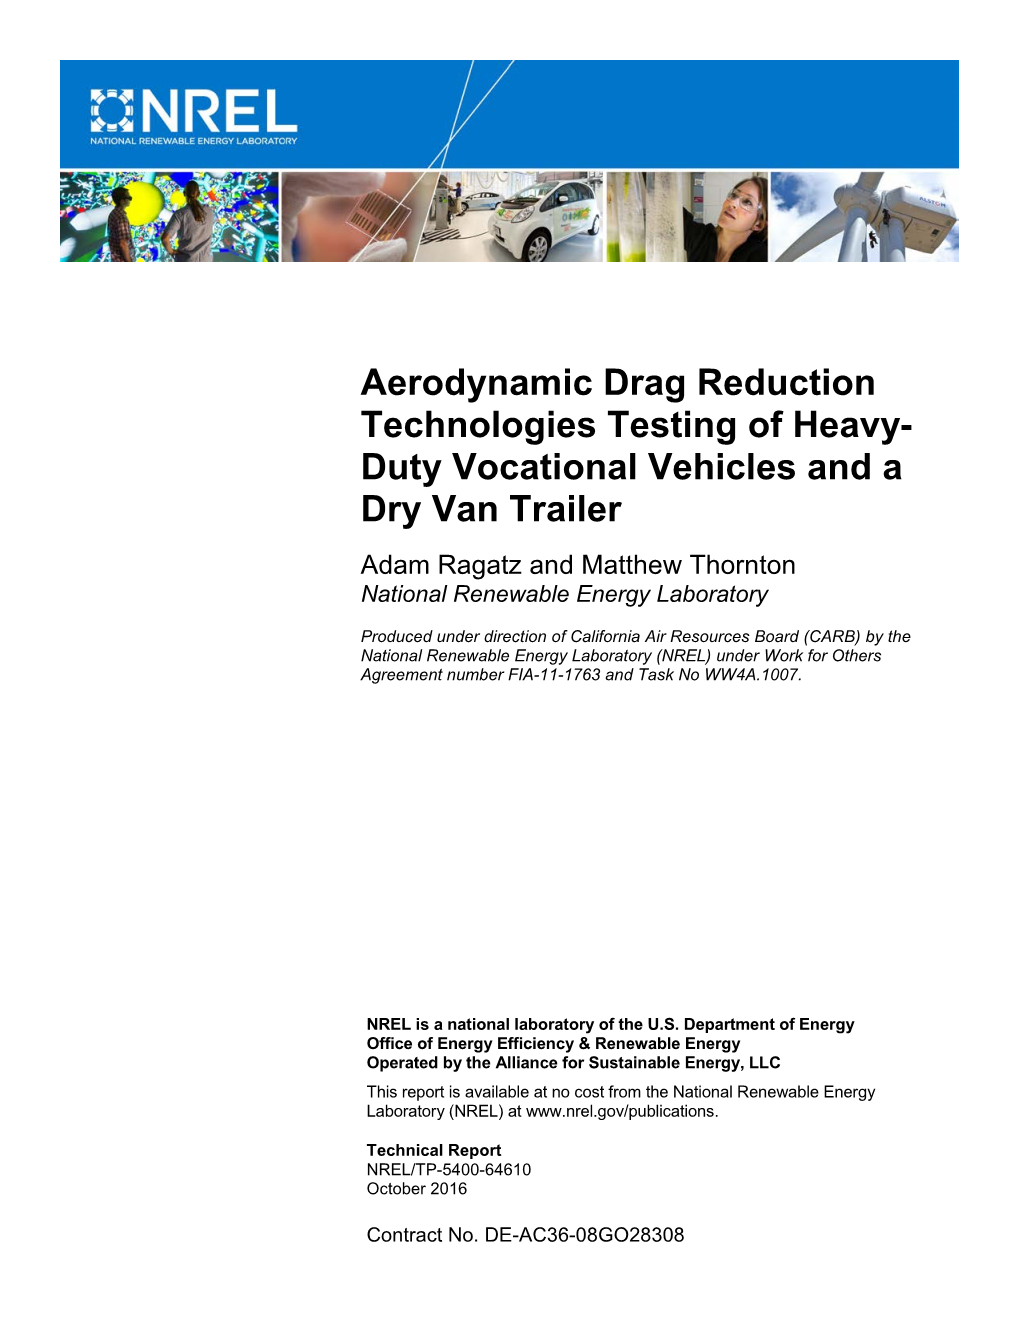 Aerodynamic Drag Reduction Technologies Testing of Heavy-Duty Vocational Vehicles and a Dry Van Trailer